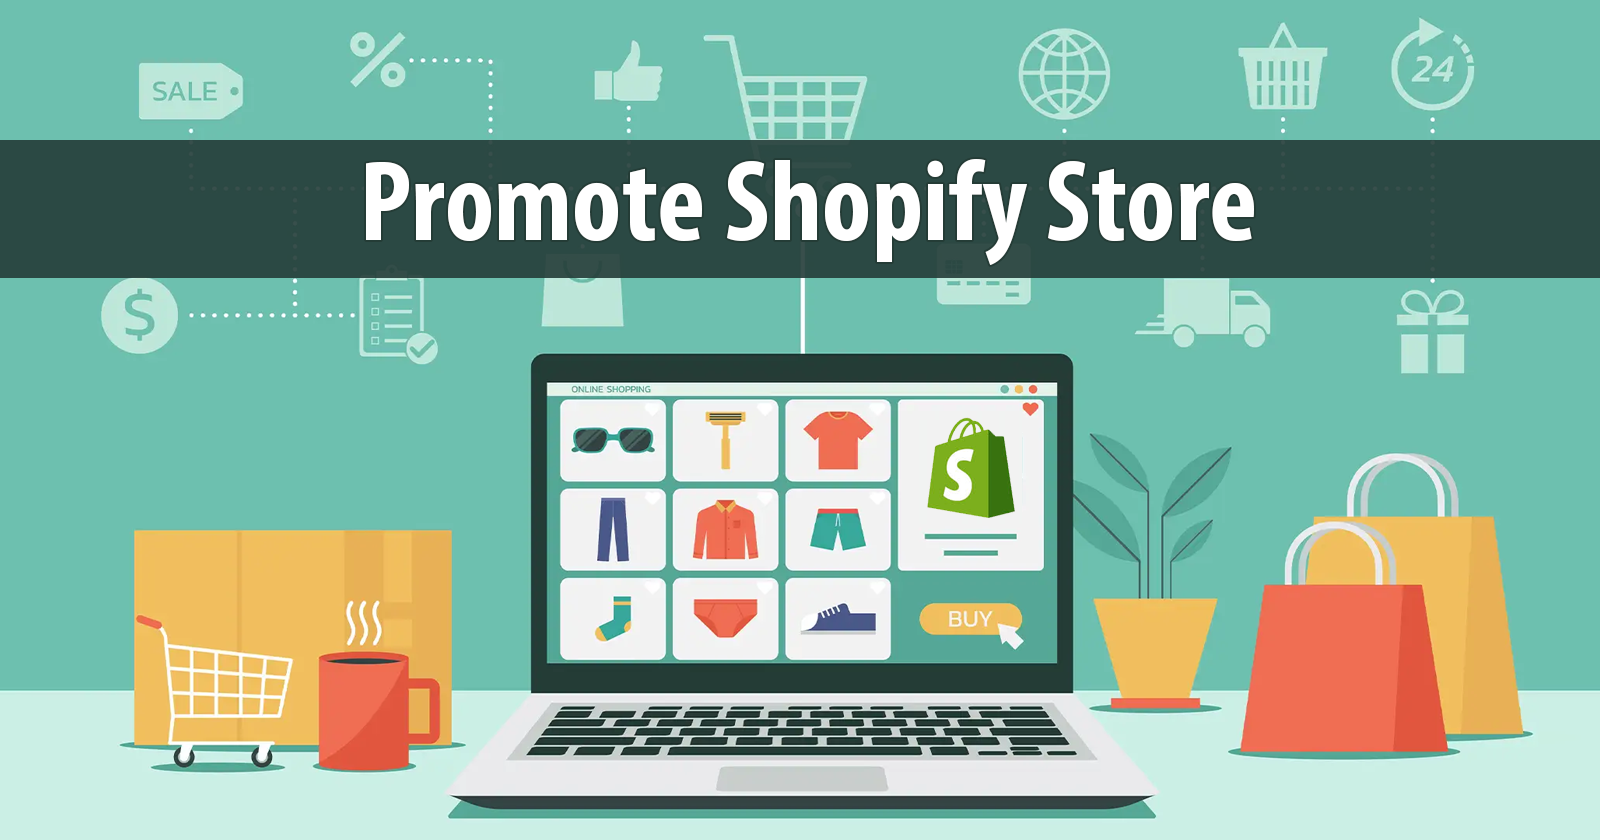 Promote Shopify Store in 5 Easy Steps